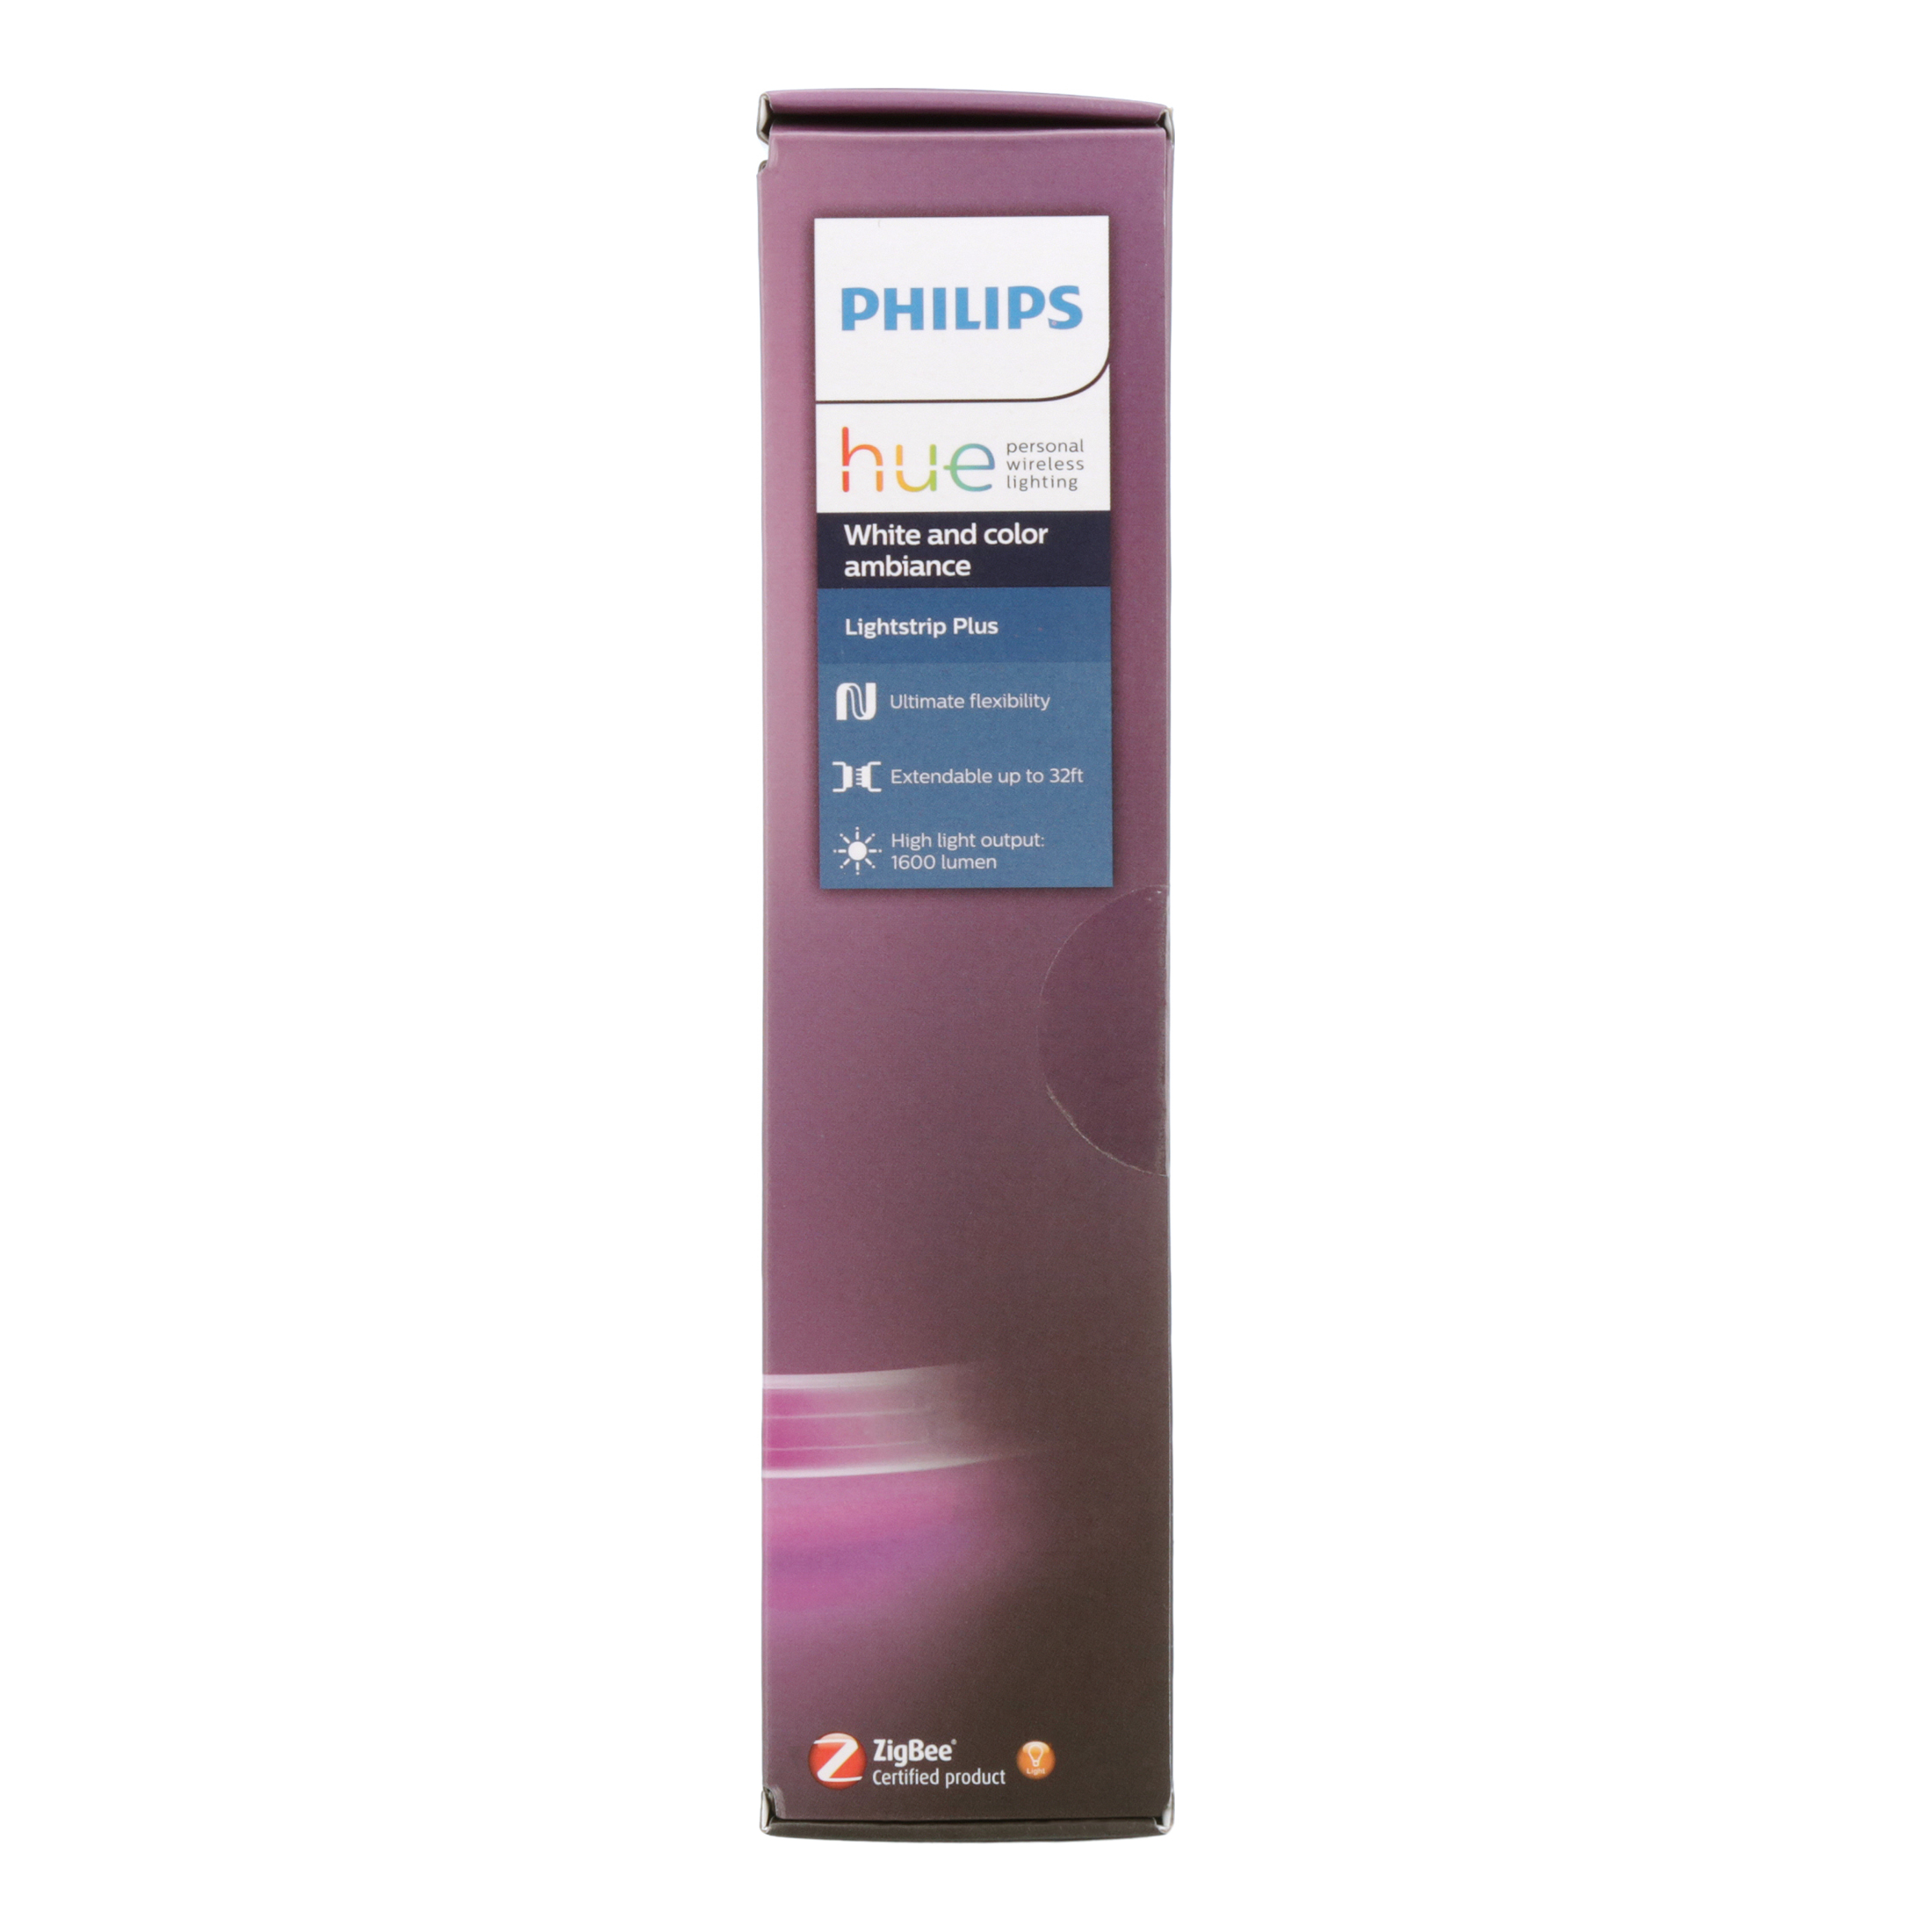 Philips Hue White and Color Ambiance Smart Indoor Light Strip Plus, 2m LED - image 5 of 11